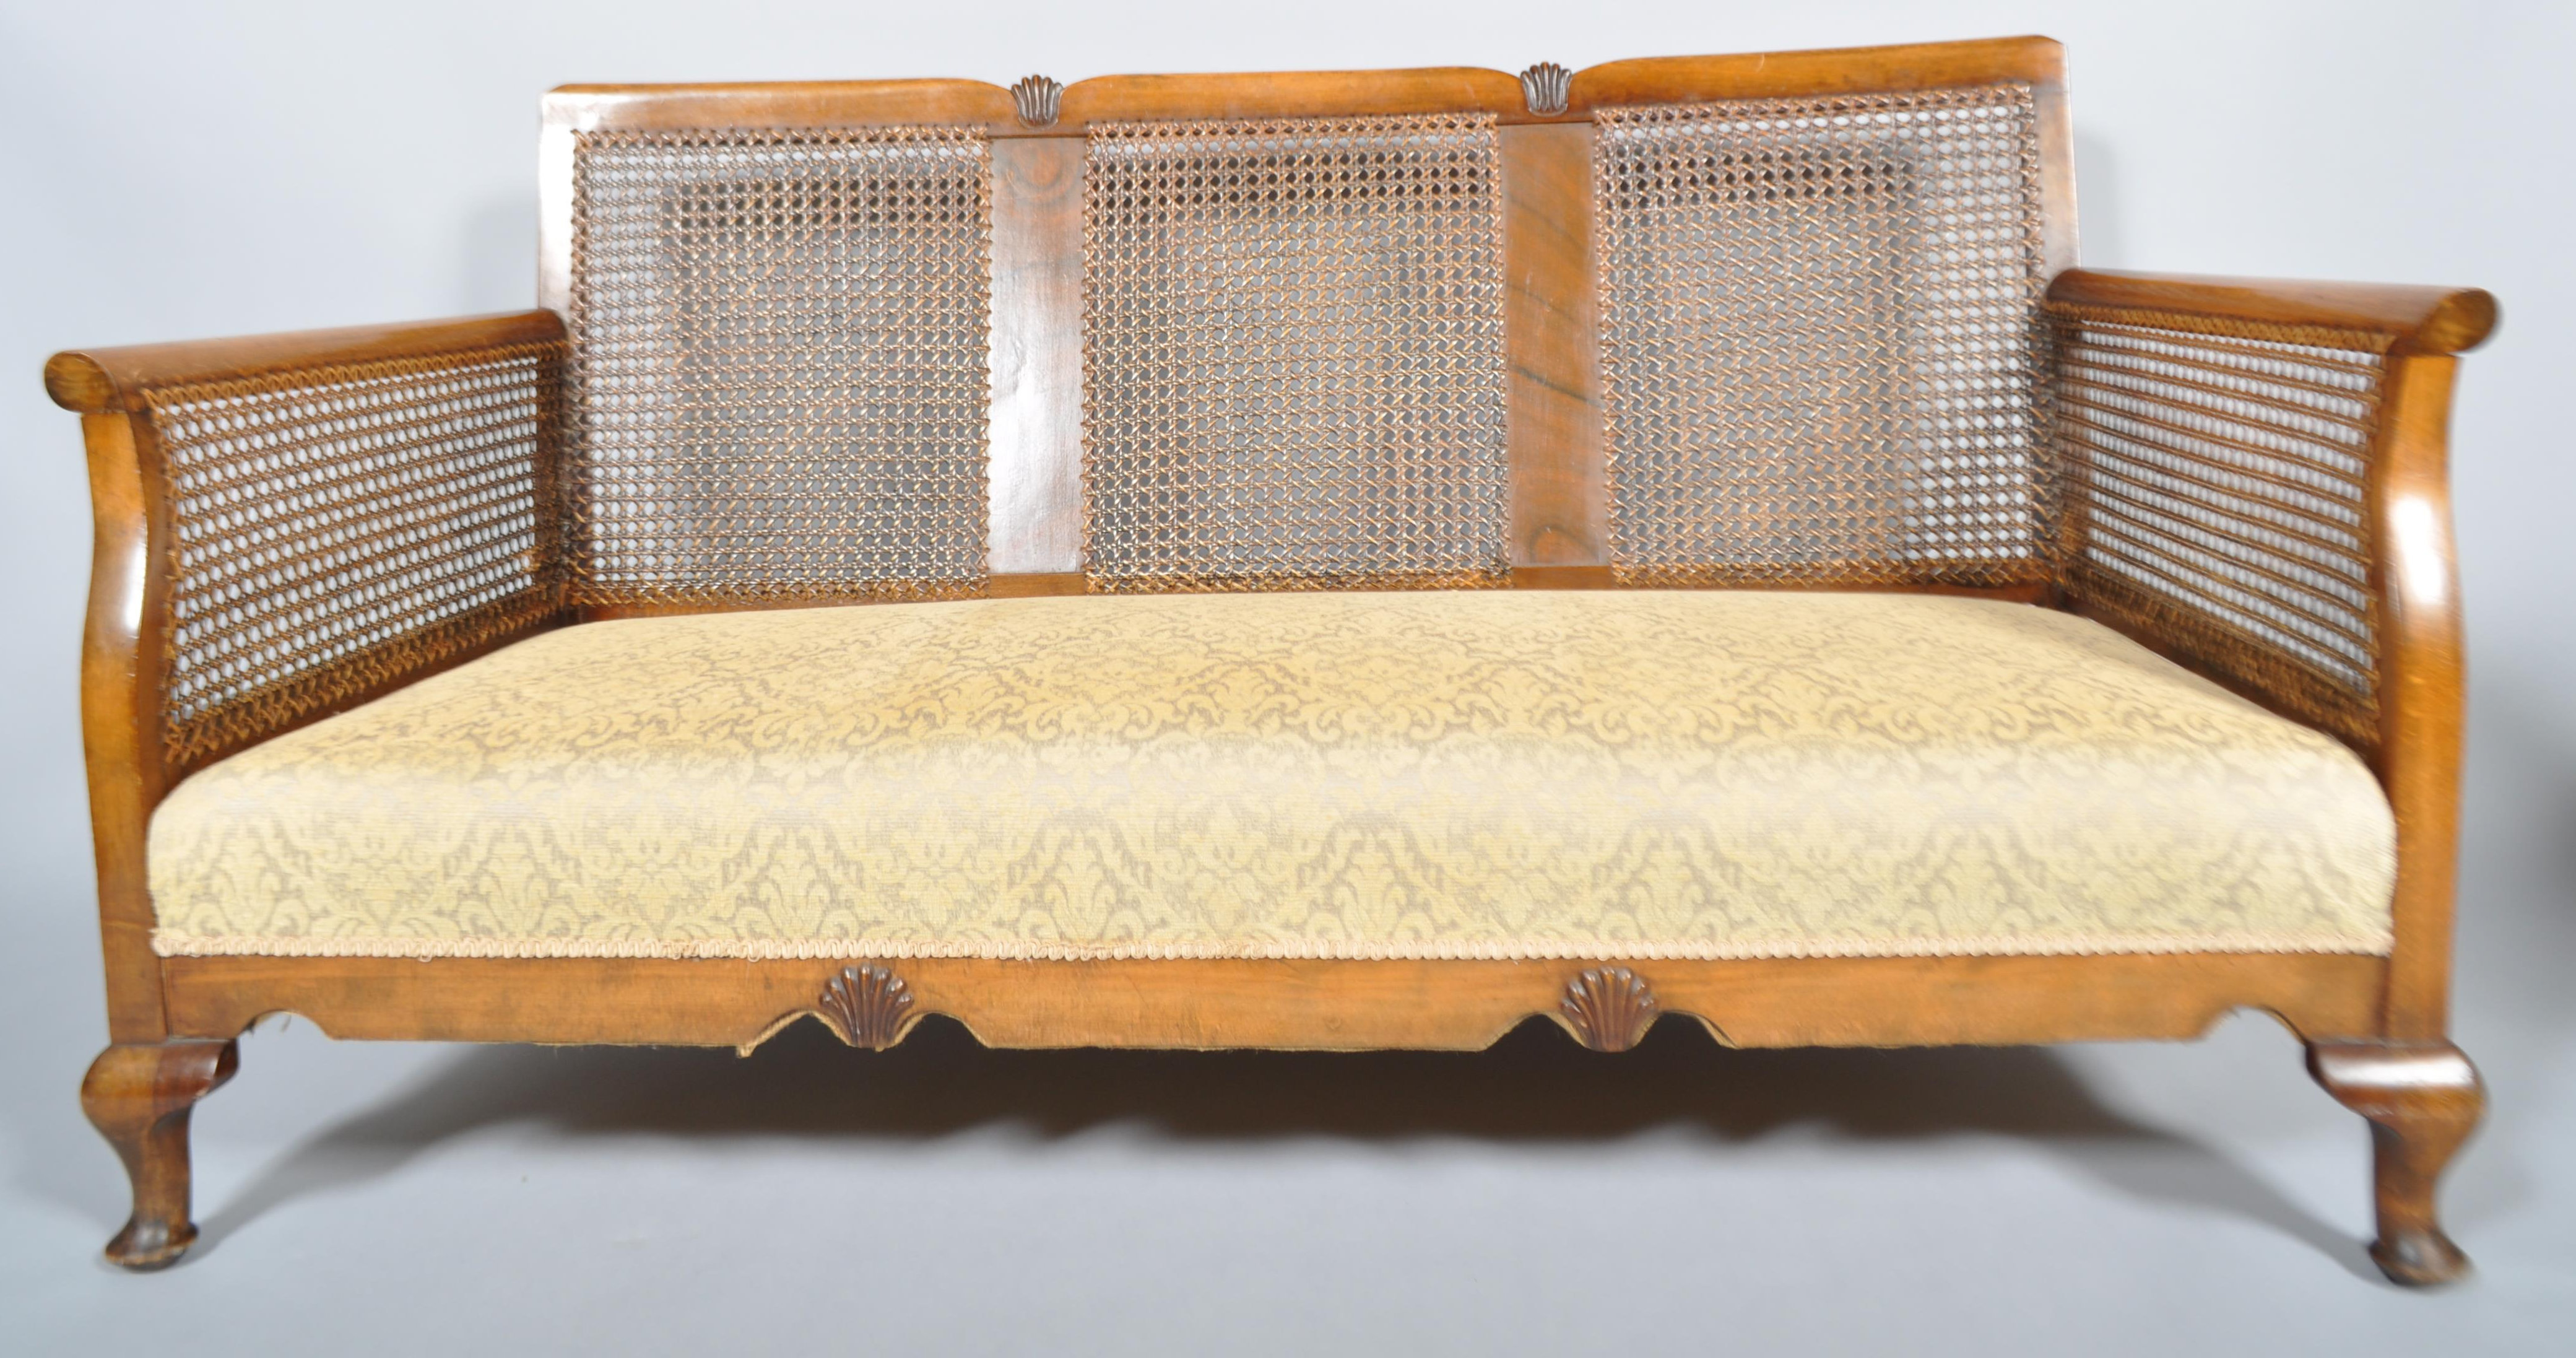 A 1930's art decor walnut and bergere cane work sofa suite - Image 3 of 5